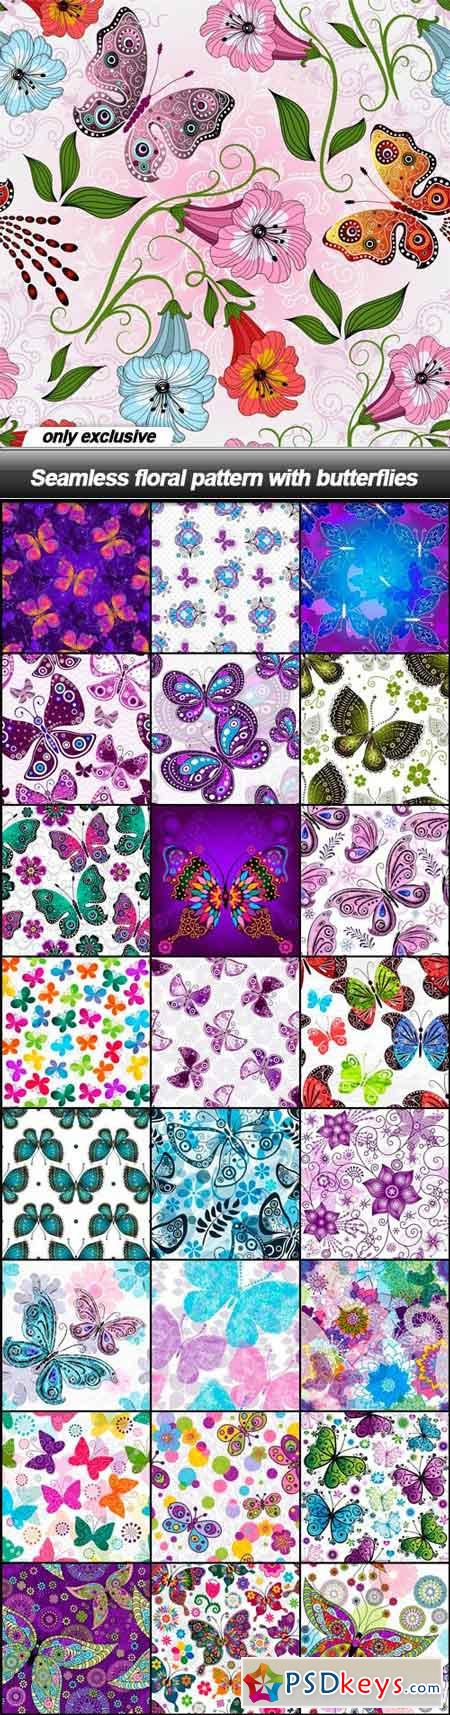 Seamless floral pattern with butterflies - 25 EPS